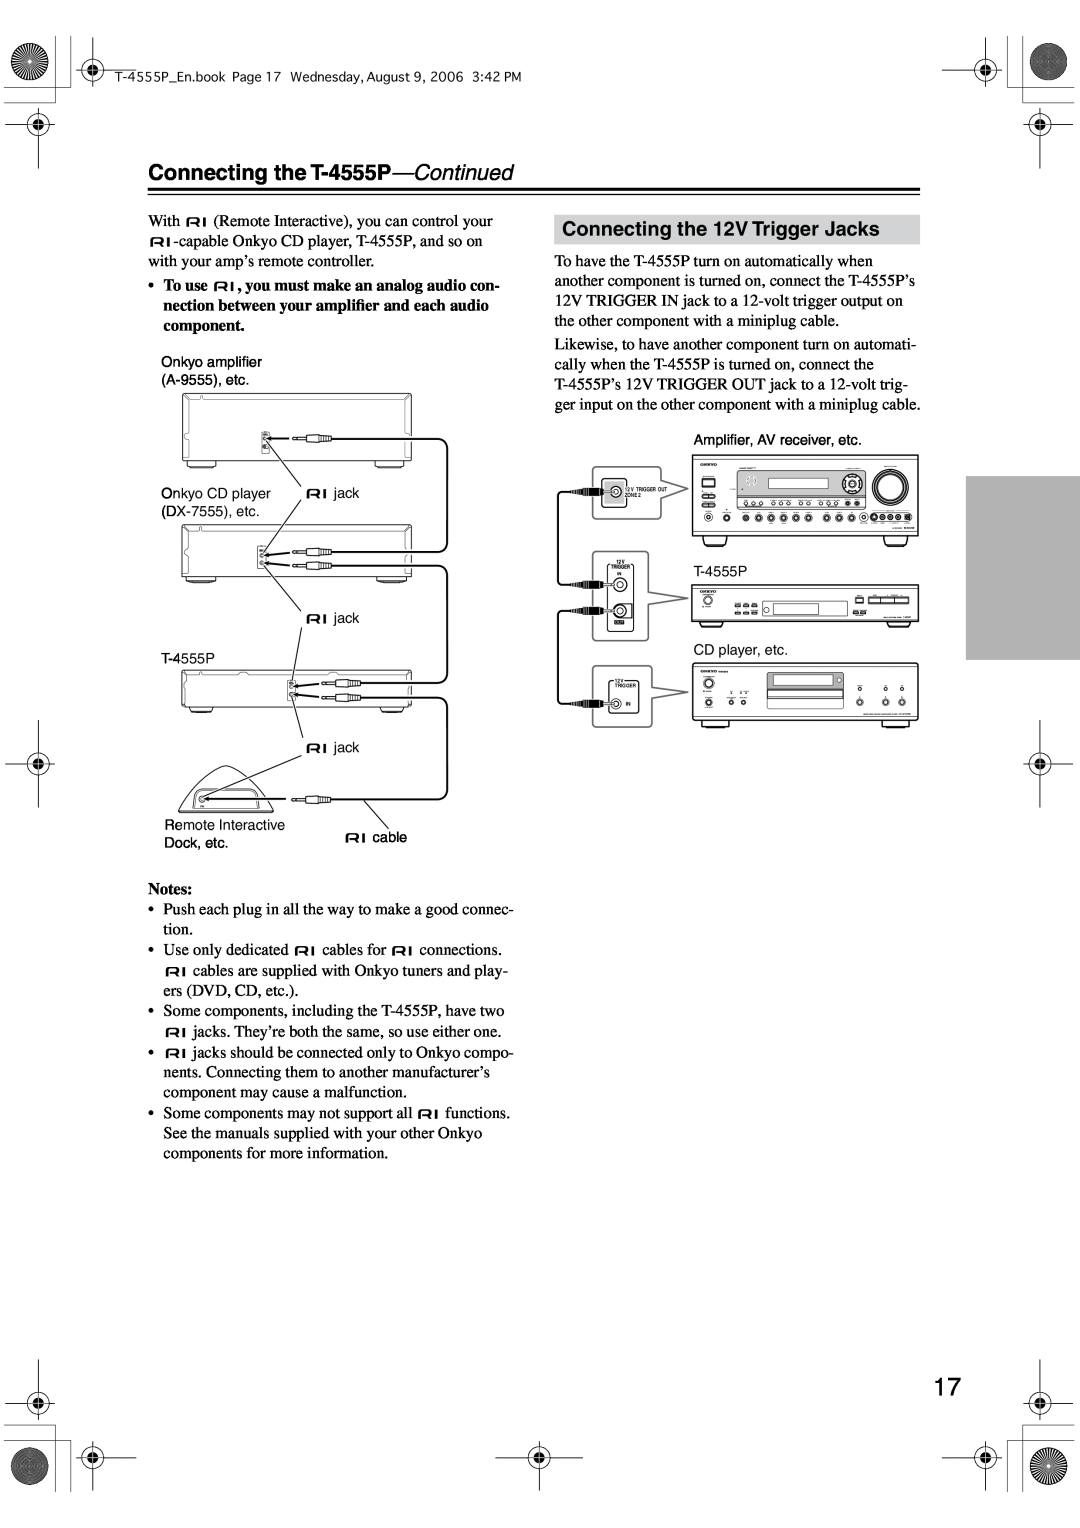 Onkyo instruction manual Connecting the T-4555P-Continued, Connecting the 12V Trigger Jacks 